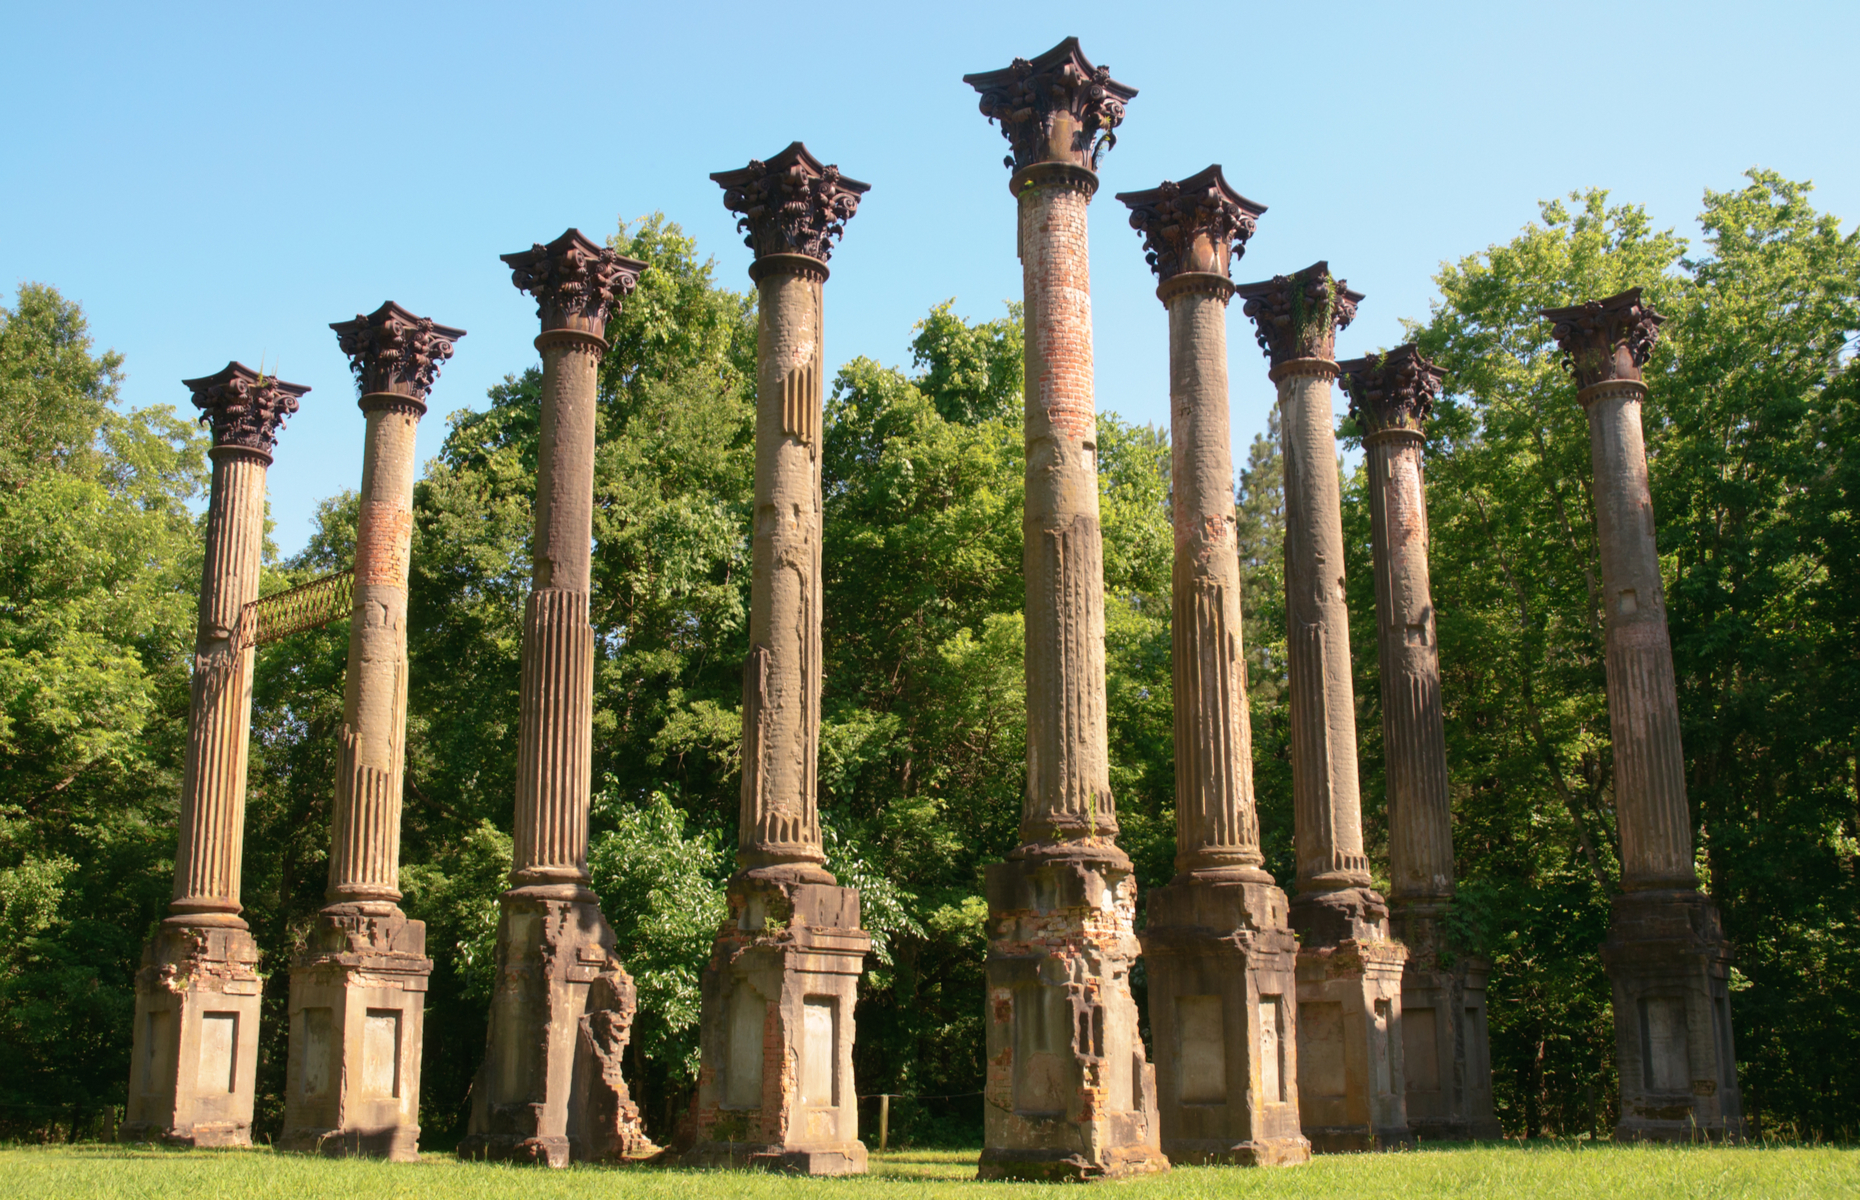 <p class="p1"><span>All that remains of the state’s largest antebellum Greek Revival mansion, which stood from 1861 until it was destroyed by fire in 1890, are 23 Corinthian columns. Designated a Mississippi landmark in 1985, some say the <a href="http://www.mdah.ms.gov/new/visit/windsor-ruins/" rel="noreferrer noopener"><span>Windsor Ruins</span></a> are still haunted by a Union soldier.</span></p>